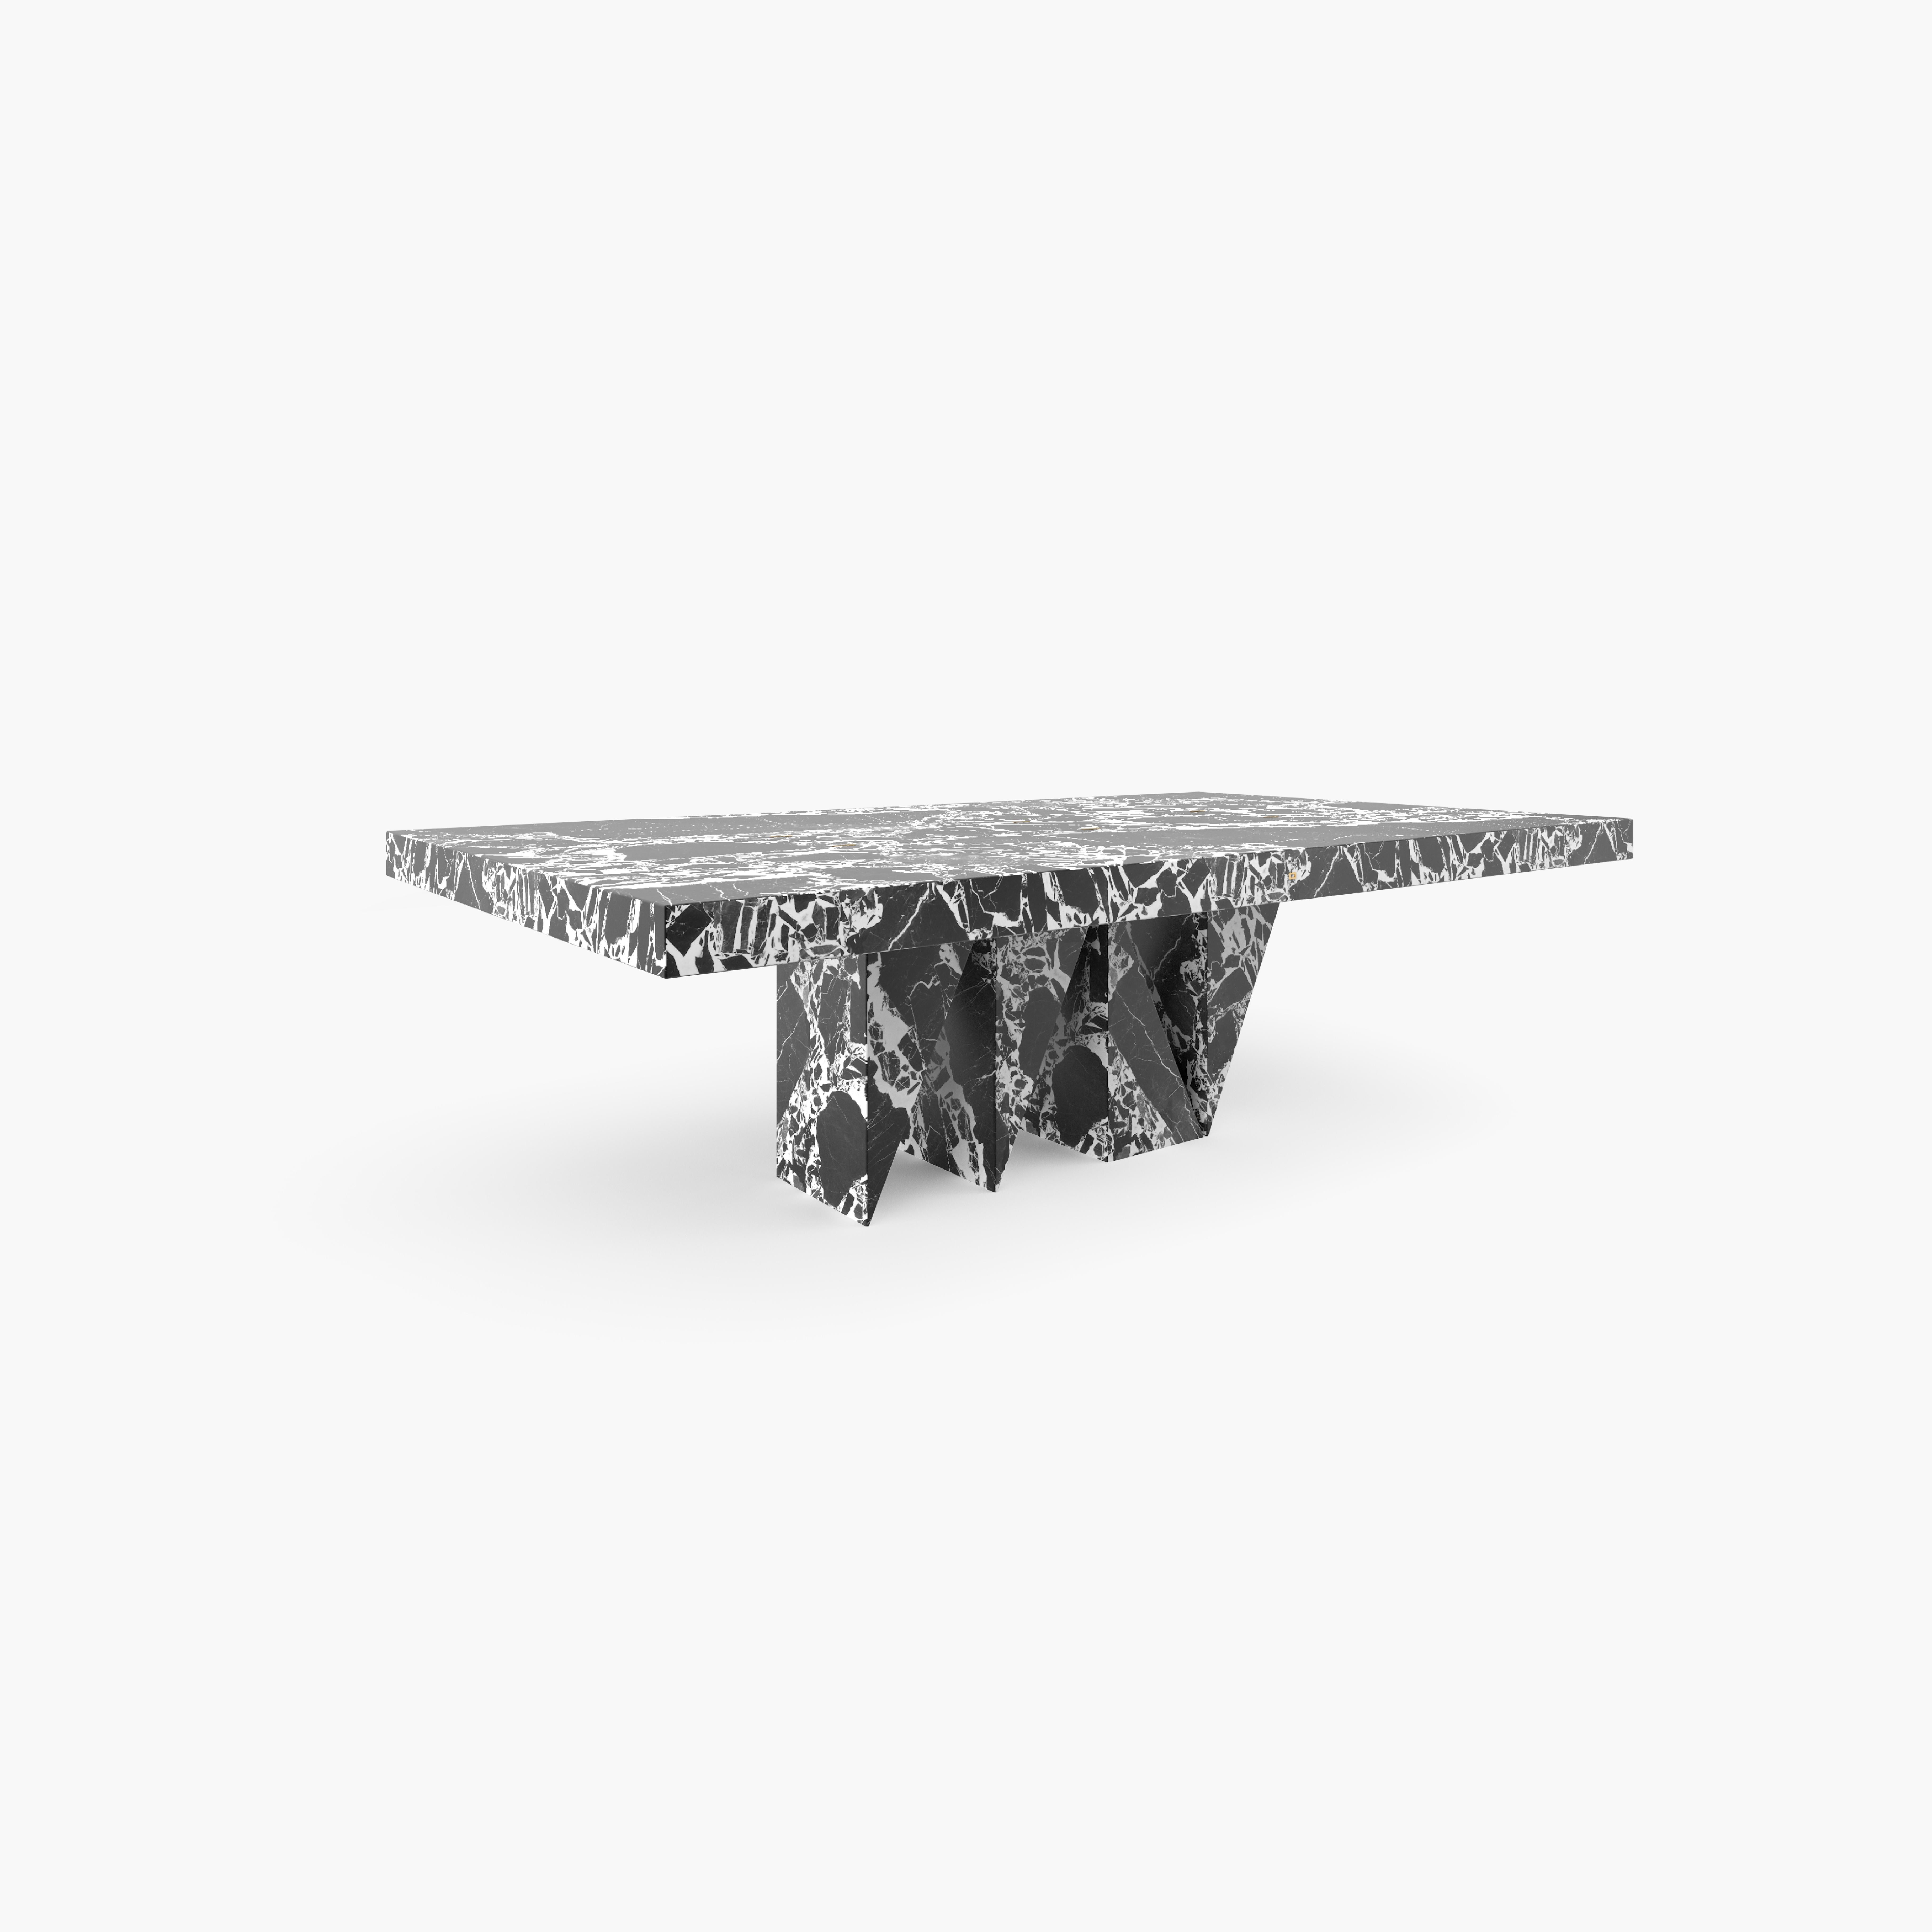 Dining-Table Black Marble 260x142x71cm Triangular Middle-Leg, Handcrafted, pc1/1 In New Condition For Sale In Bochum, DE